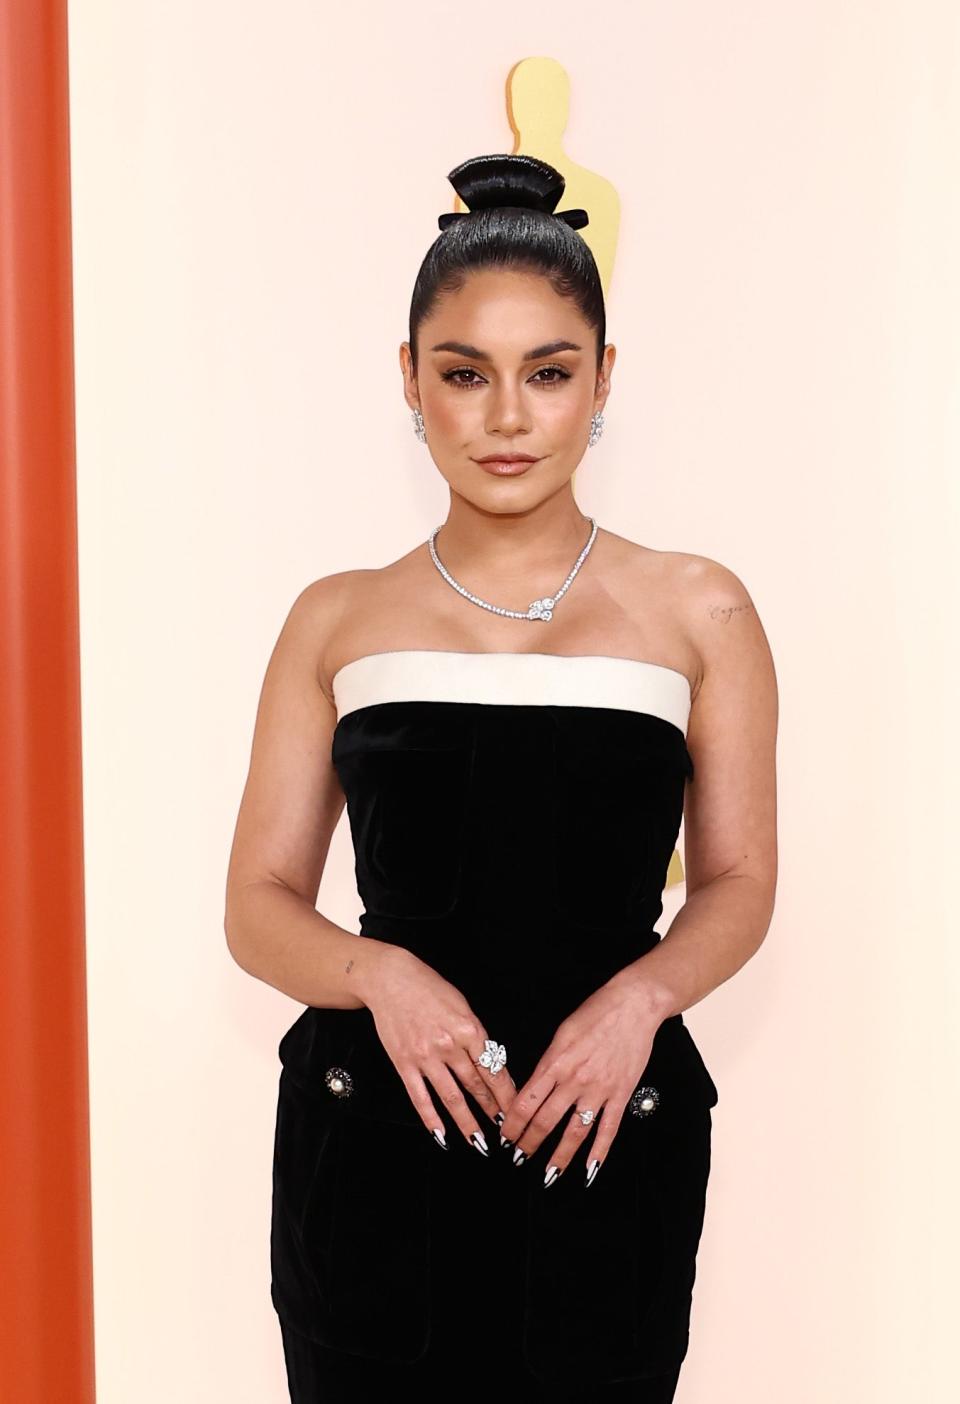 Vanessa Hudgens in a strapless gown with a diamond necklace and her hair in a sleek topknot